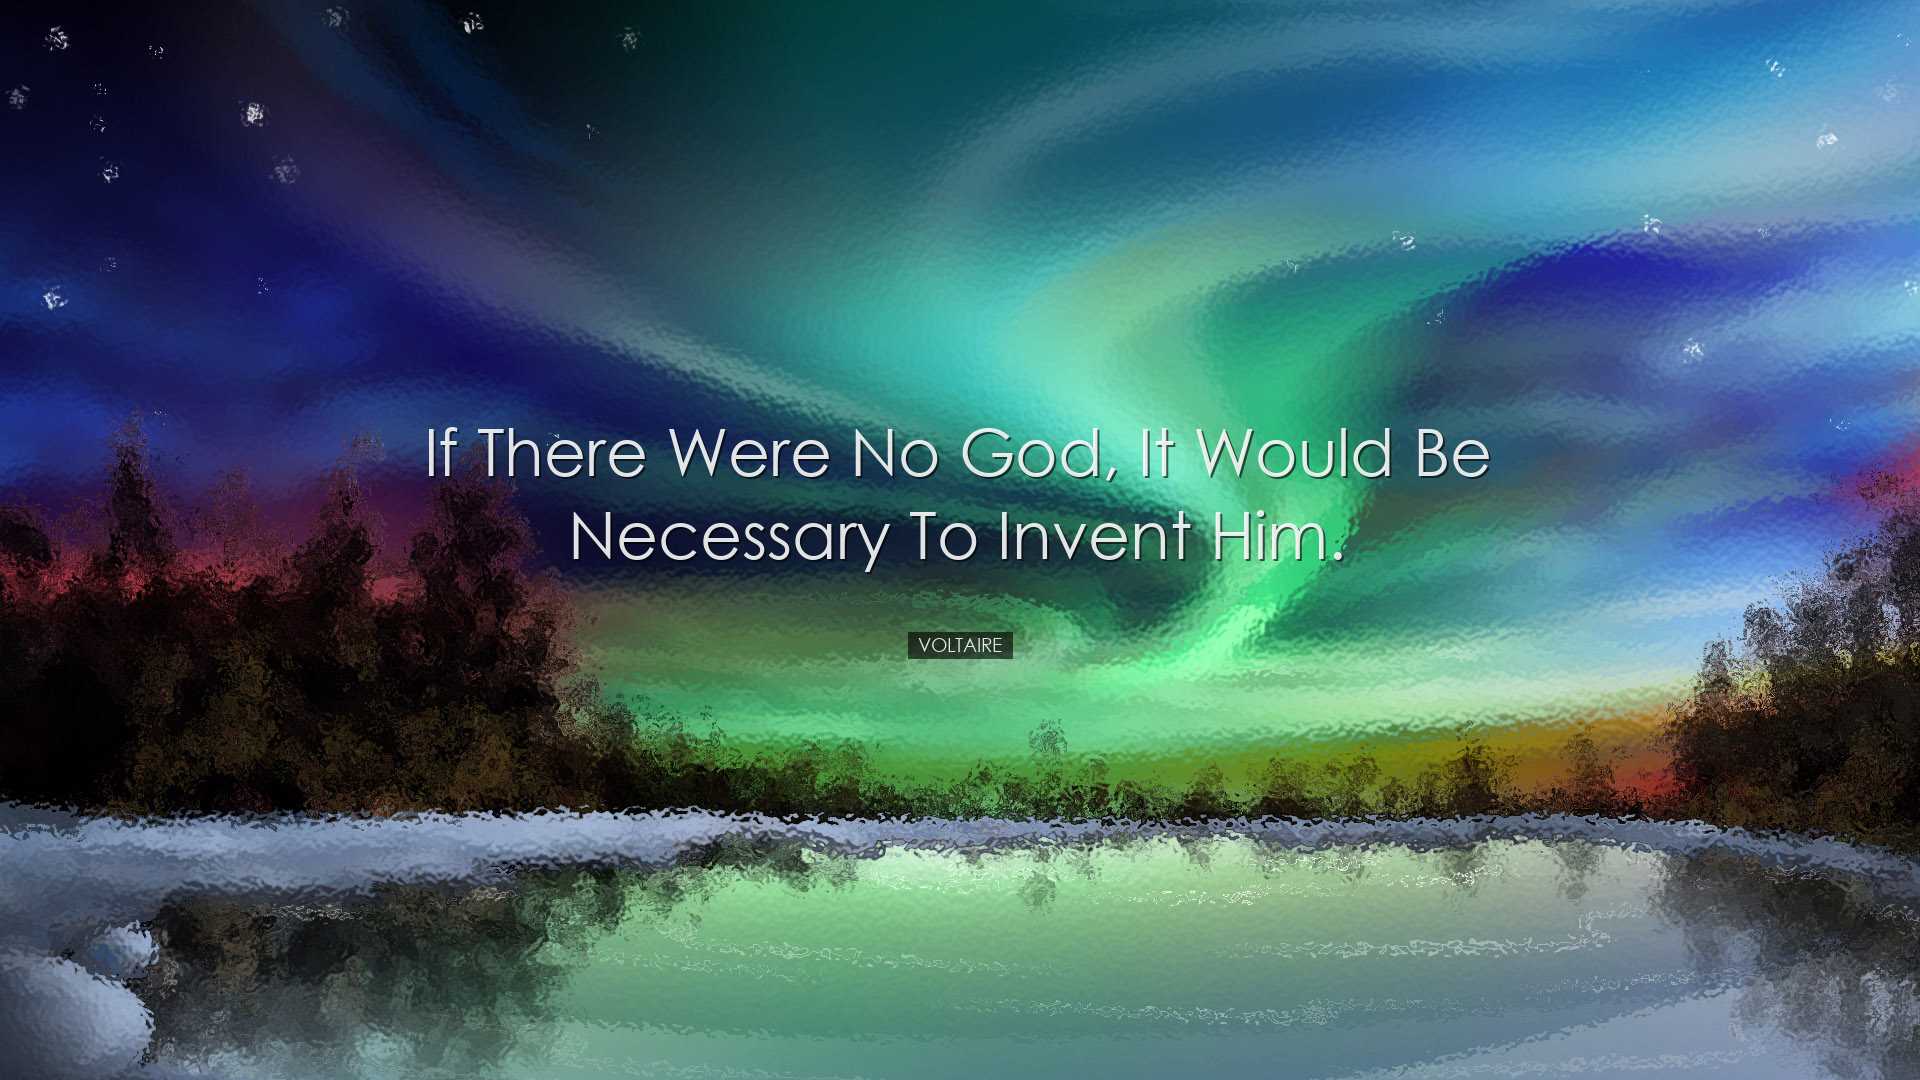 If there were no God, it would be necessary to invent him. - Volta